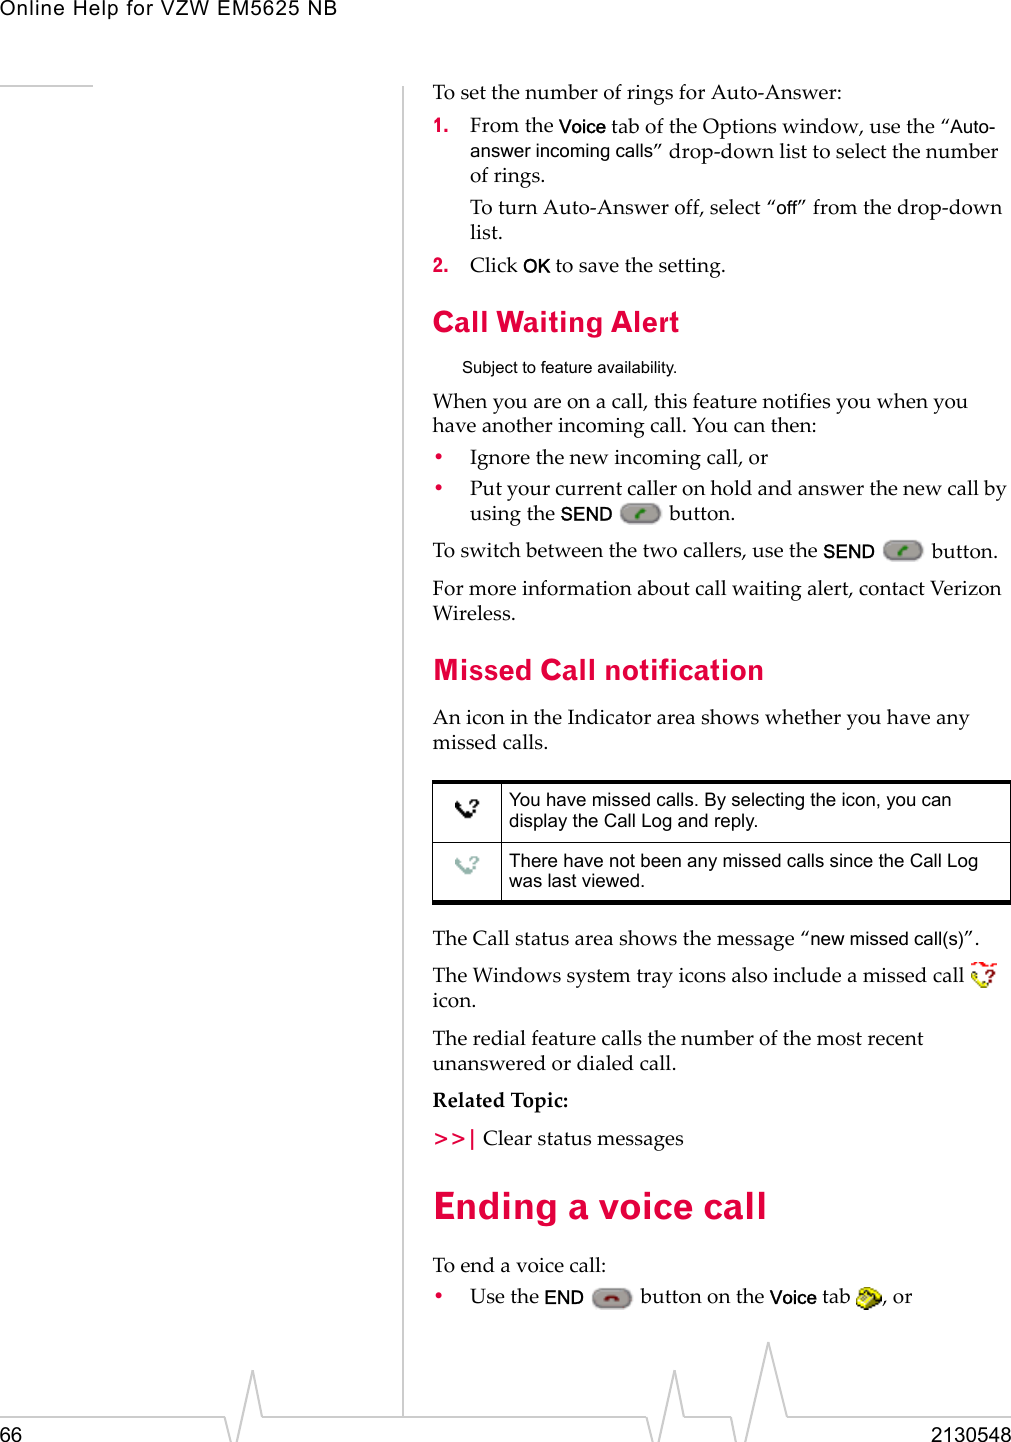 Online Help for VZW EM5625 NB66 2130548To set the number of rings for Auto-Answer:1. From the Voice tab of the Options window, use the “Auto-answer incoming calls” drop-down list to select the number of rings.To turn Auto-Answer off, select “off” from the drop-down list.2. Click OK to save the setting.Call Waiting AlertSubject to feature availability.When you are on a call, this feature notifies you when you have another incoming call. You can then:•Ignore the new incoming call, or•Put your current caller on hold and answer the new call by using the SEND  button.To switch between the two callers, use the SEND  button.For more information about call waiting alert, contact Verizon Wireless.Missed Call notificationAn icon in the Indicator area shows whether you have any missed calls.The Call status area shows the message “new missed call(s)”.The Windows system tray icons also include a missed call   icon.The redial feature calls the number of the most recent unanswered or dialed call.Related Topic:&gt;&gt;| Clear status messagesEnding a voice callTo end a voice call:•Use the END   button on the Voice tab  , orYou have missed calls. By selecting the icon, you can display the Call Log and reply.There have not been any missed calls since the Call Log was last viewed.